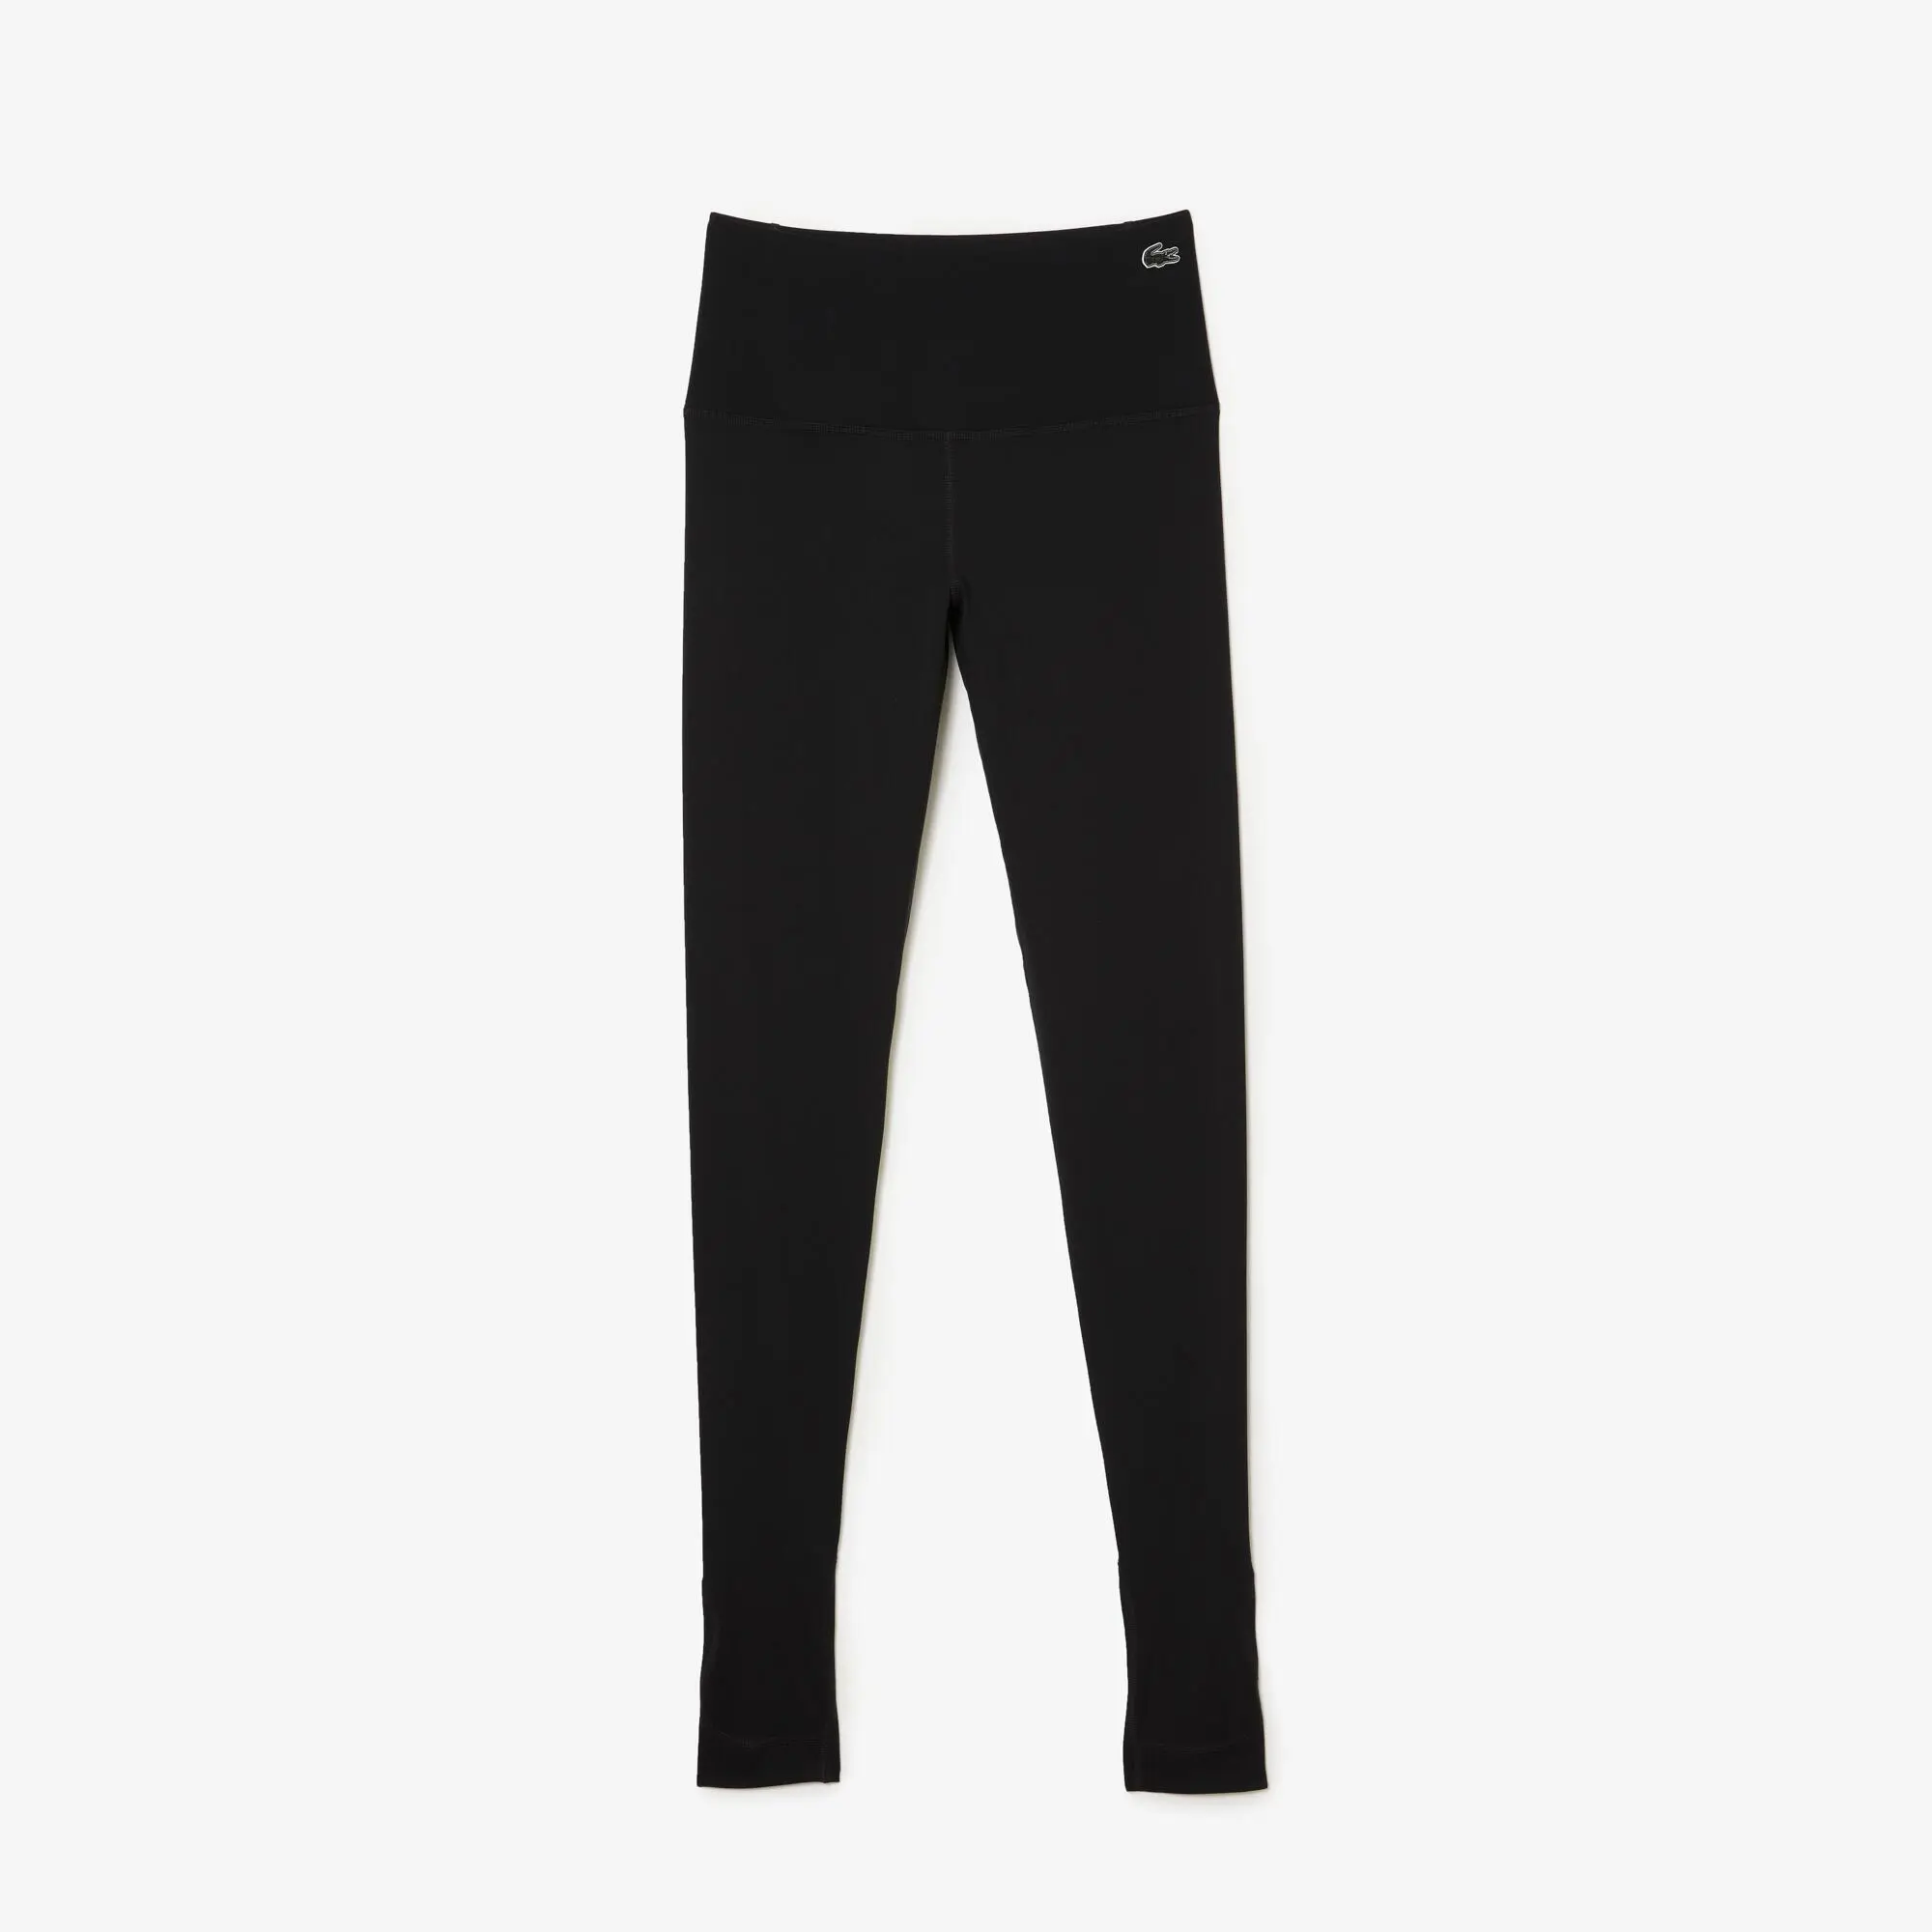 Lacoste Women’s Lacoste Recycled Polyester Tapered Leggings. 2